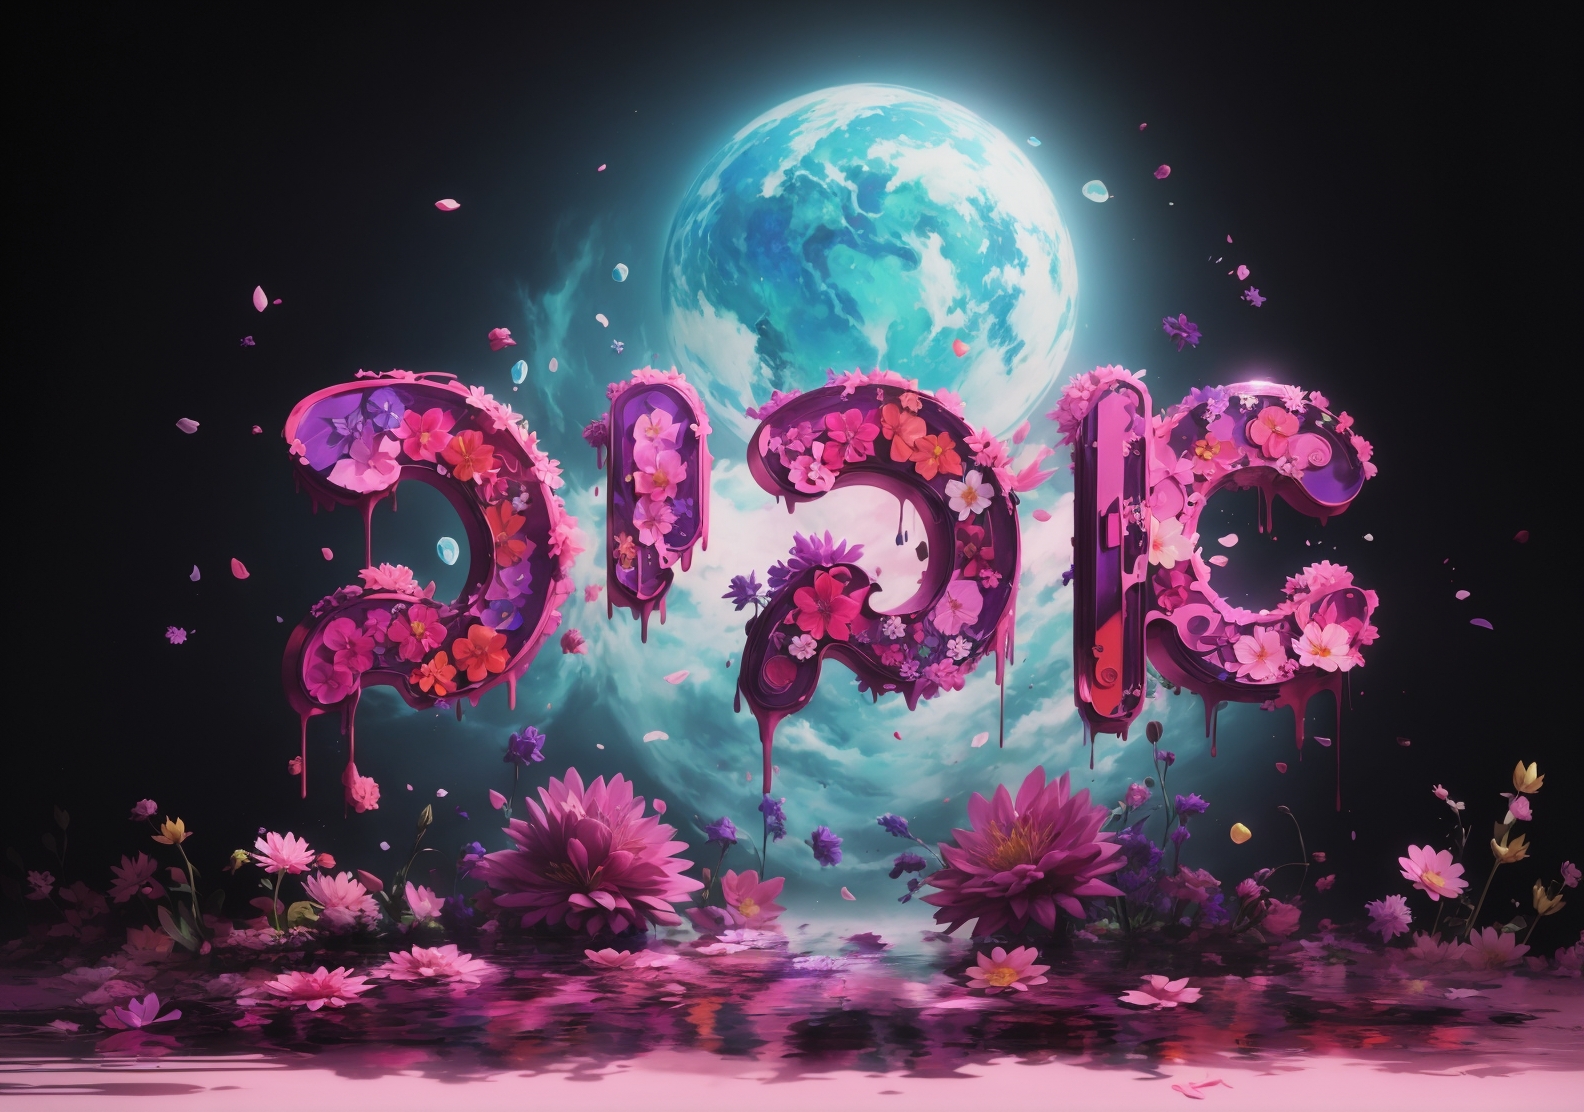 3D_Animation_Style_Letters_made_of_flowers_in_shades_of_pink_p_0.jpg